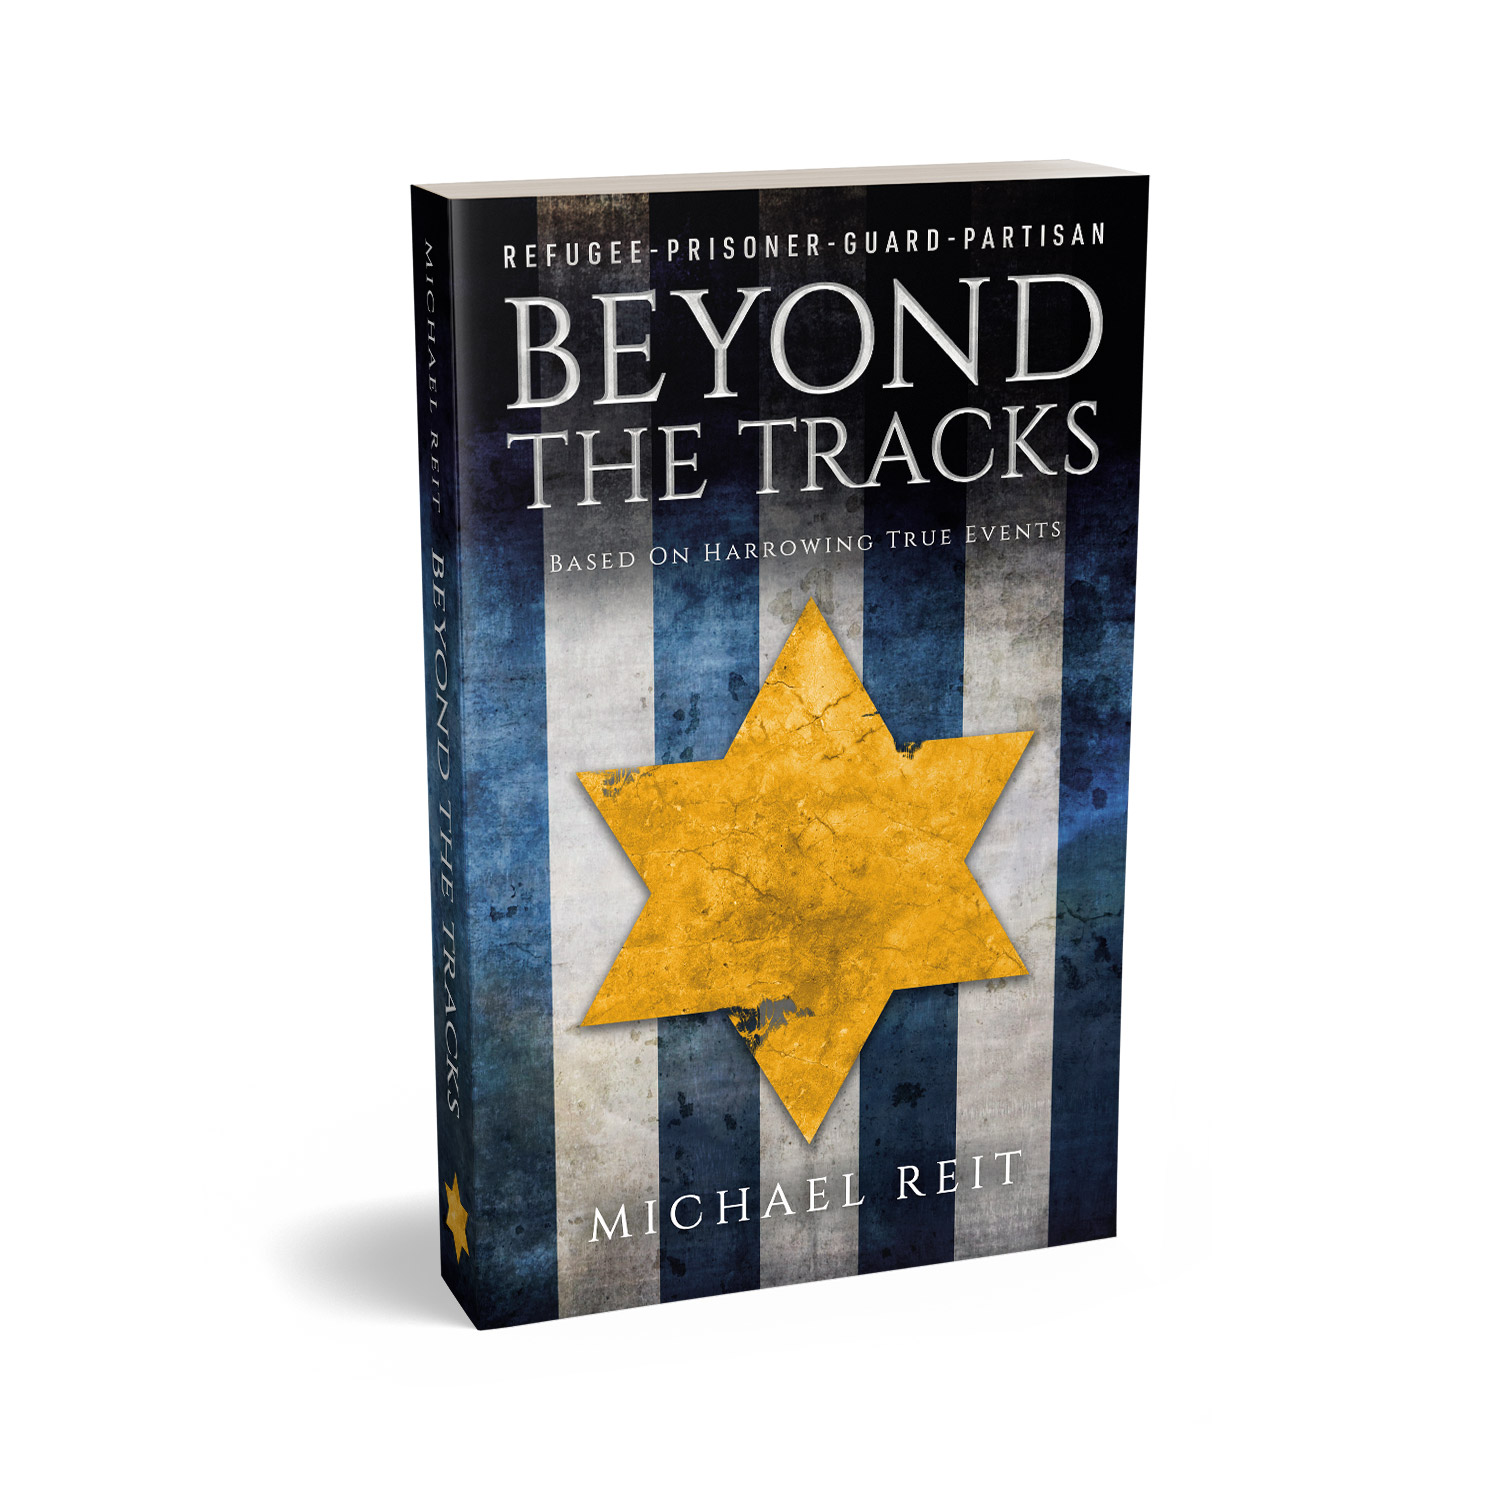 'Beyond The Tracks' is a harrowing tale of survival during WW2. The author is Michael Reit. The book cover design and interior formatting are by Mark Thomas. To learn more about what Mark could do for your book, please visit coverness.com.